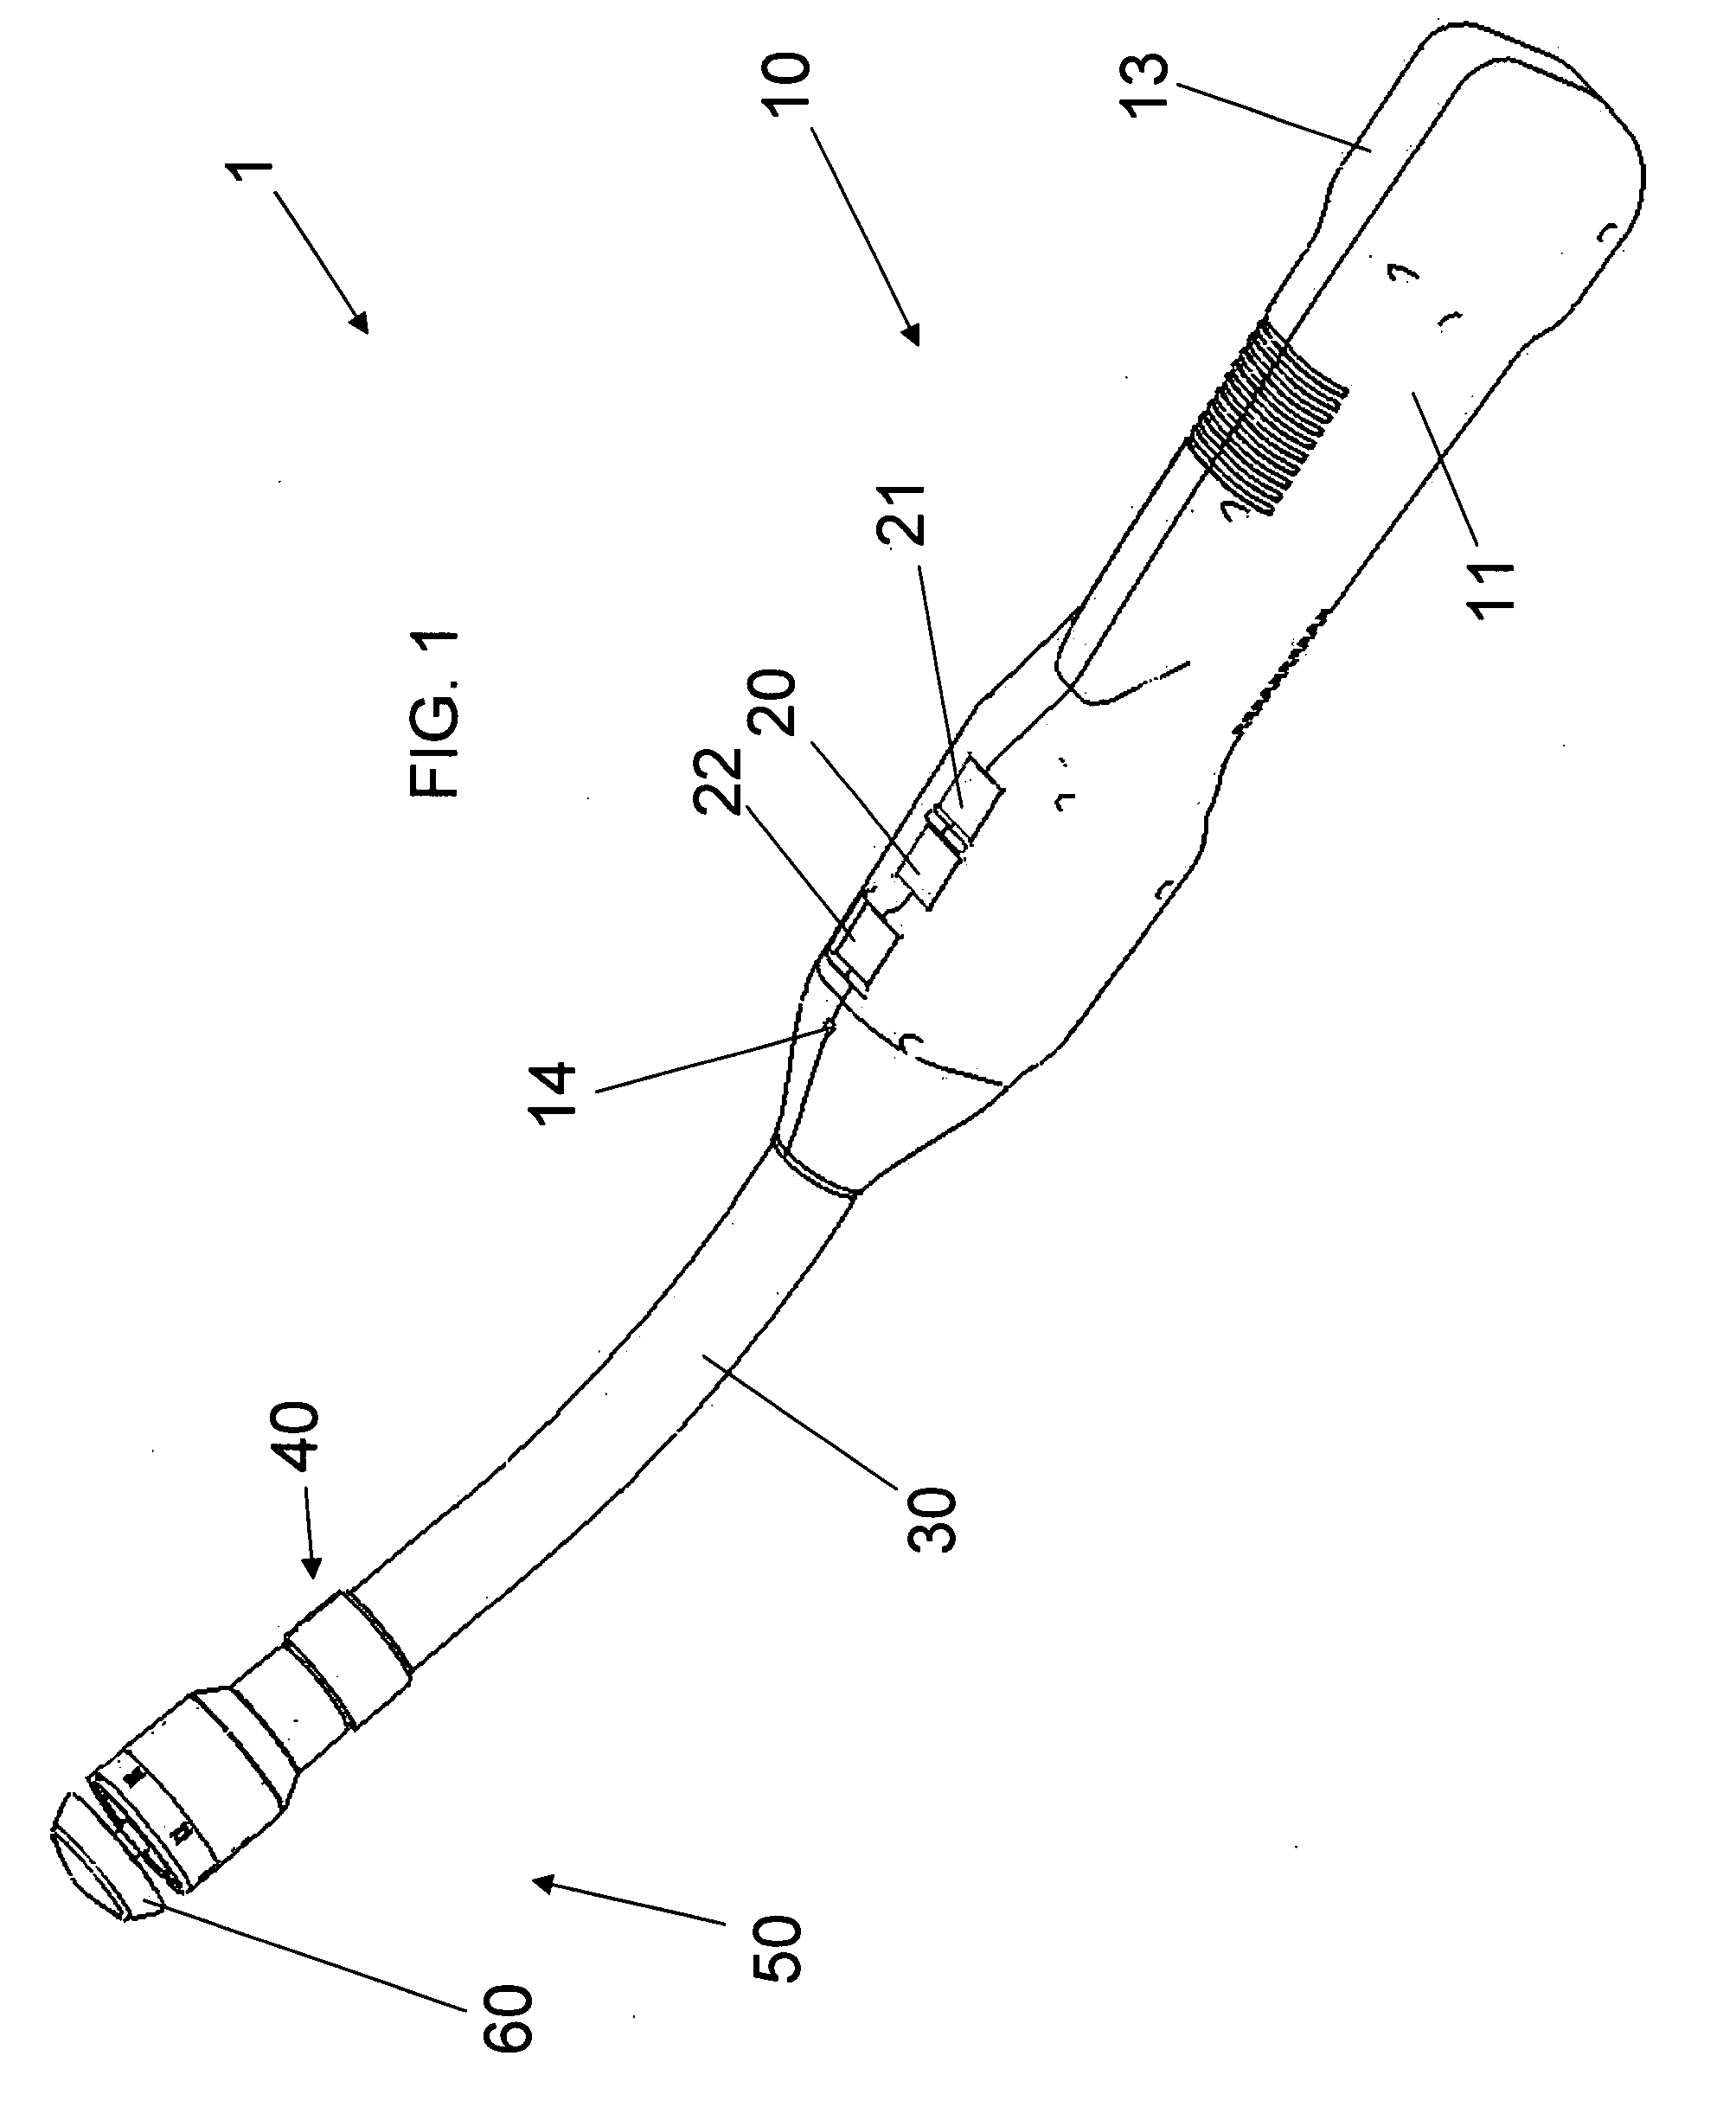 Electrical surgical instrument with optimized power supply and drive